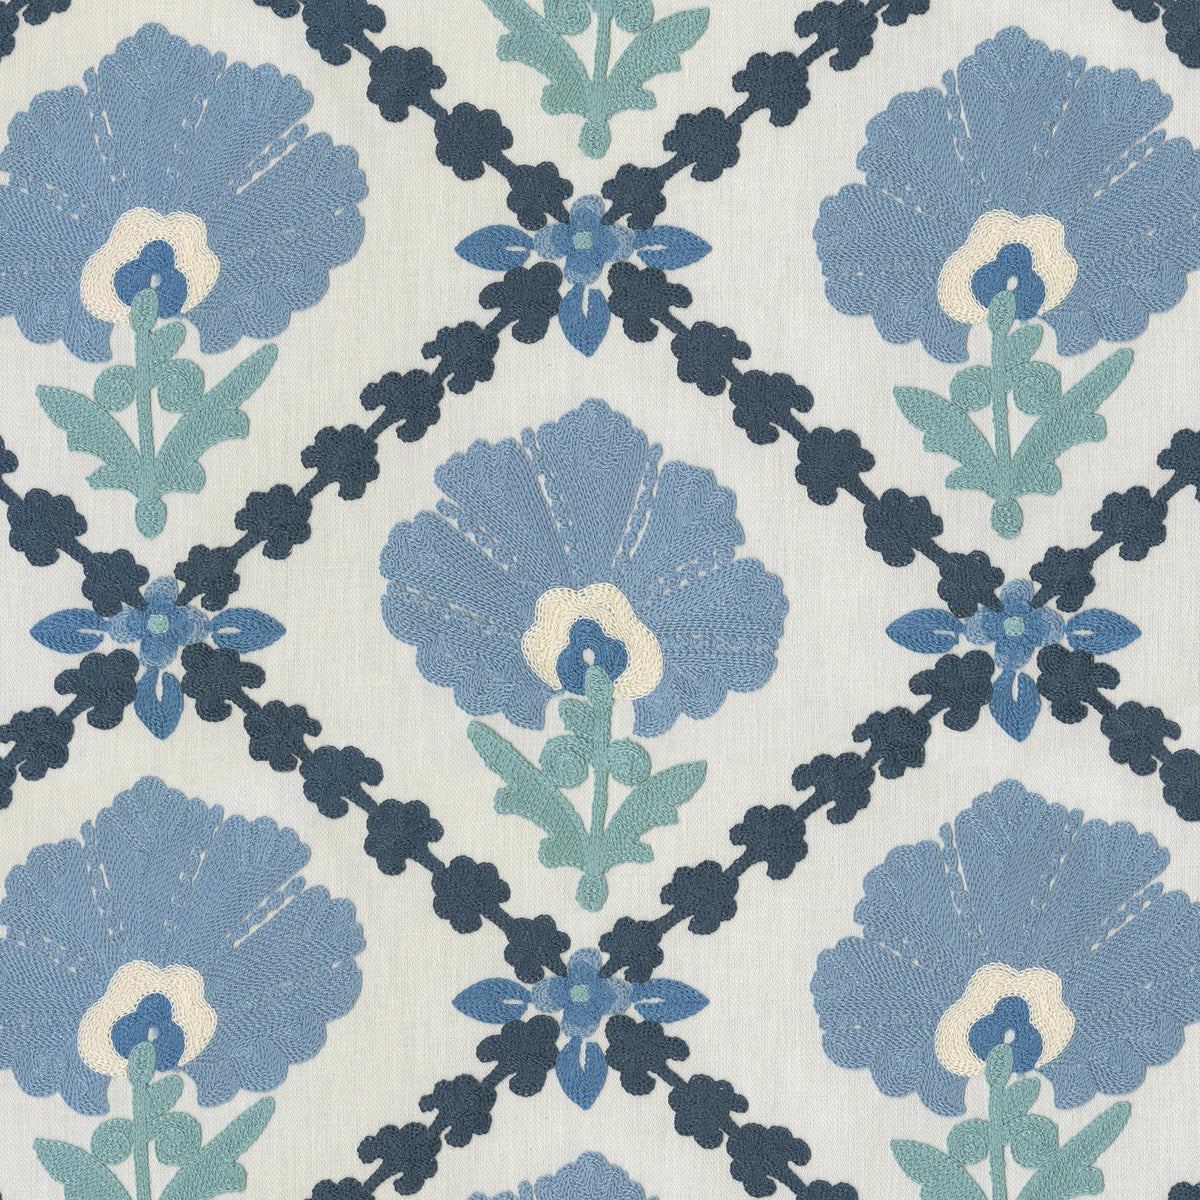 P/K Lifestyles Grand Fleur Embroidery - Porcelain 411403 Upholstery Fabric